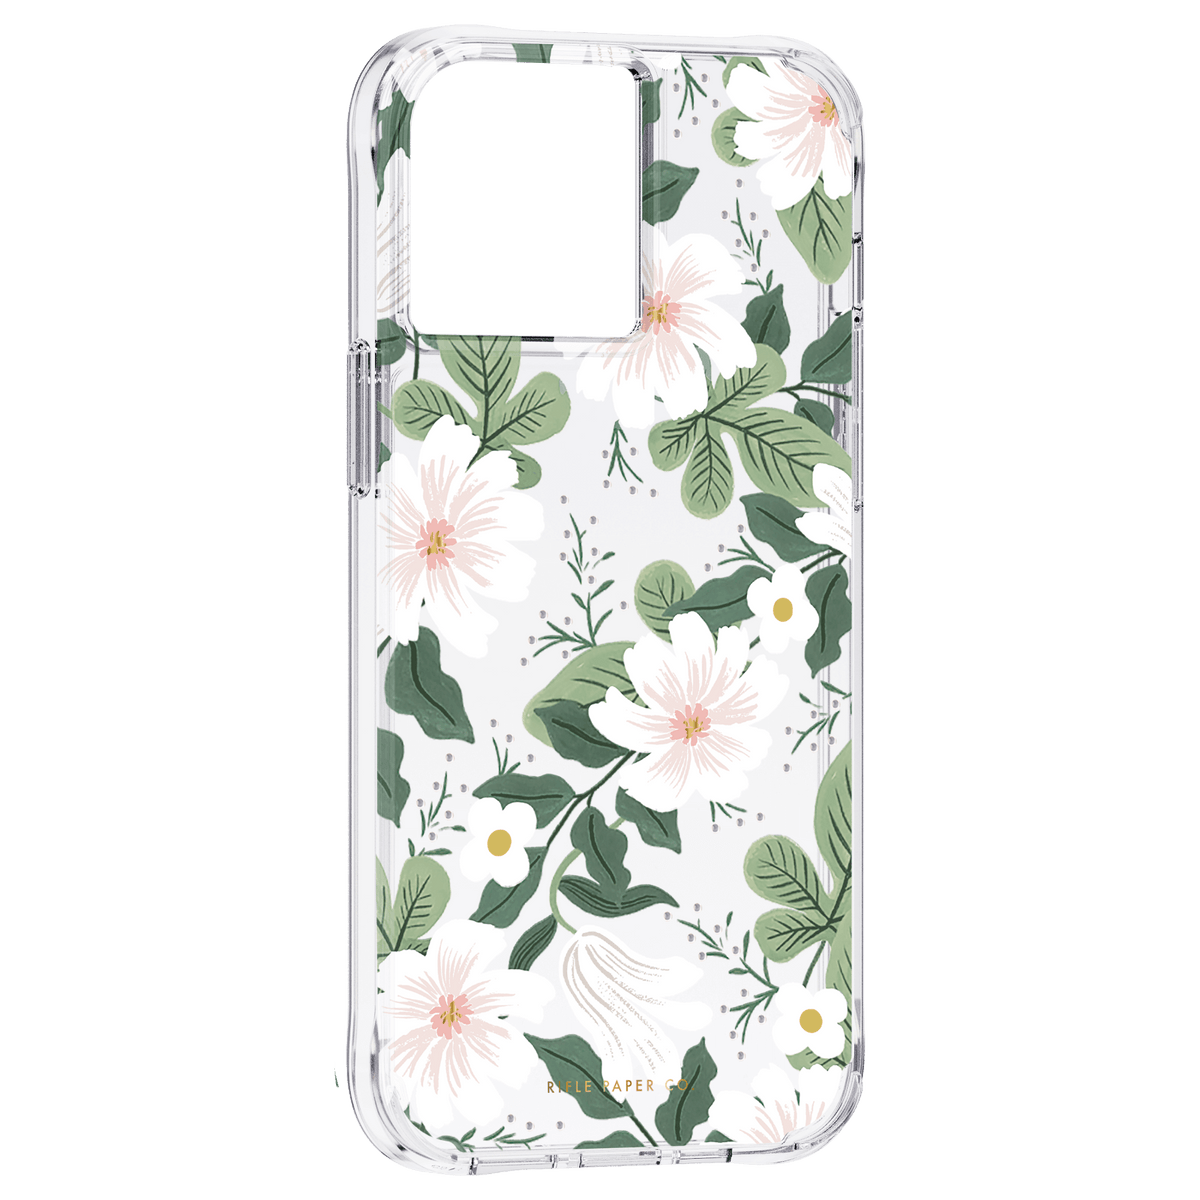 [OPEN BOX] RIFLE PAPER CO. iPhone 13 Pro Max Case - Willow w/ Antimicrobial